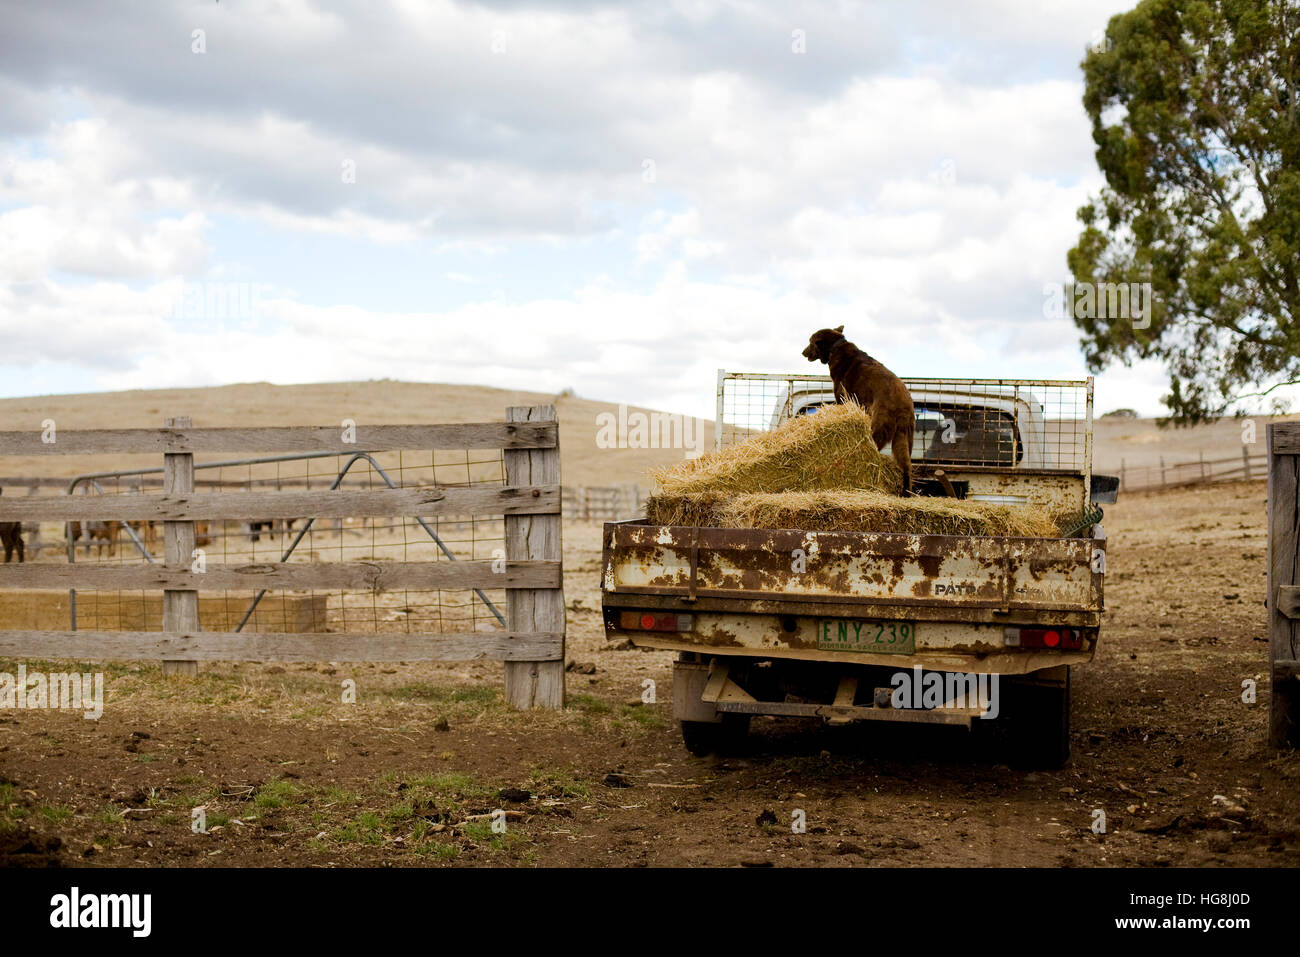 A working dog on the back of a truck willed with hay on a cattle ranch farm. Stock Photo